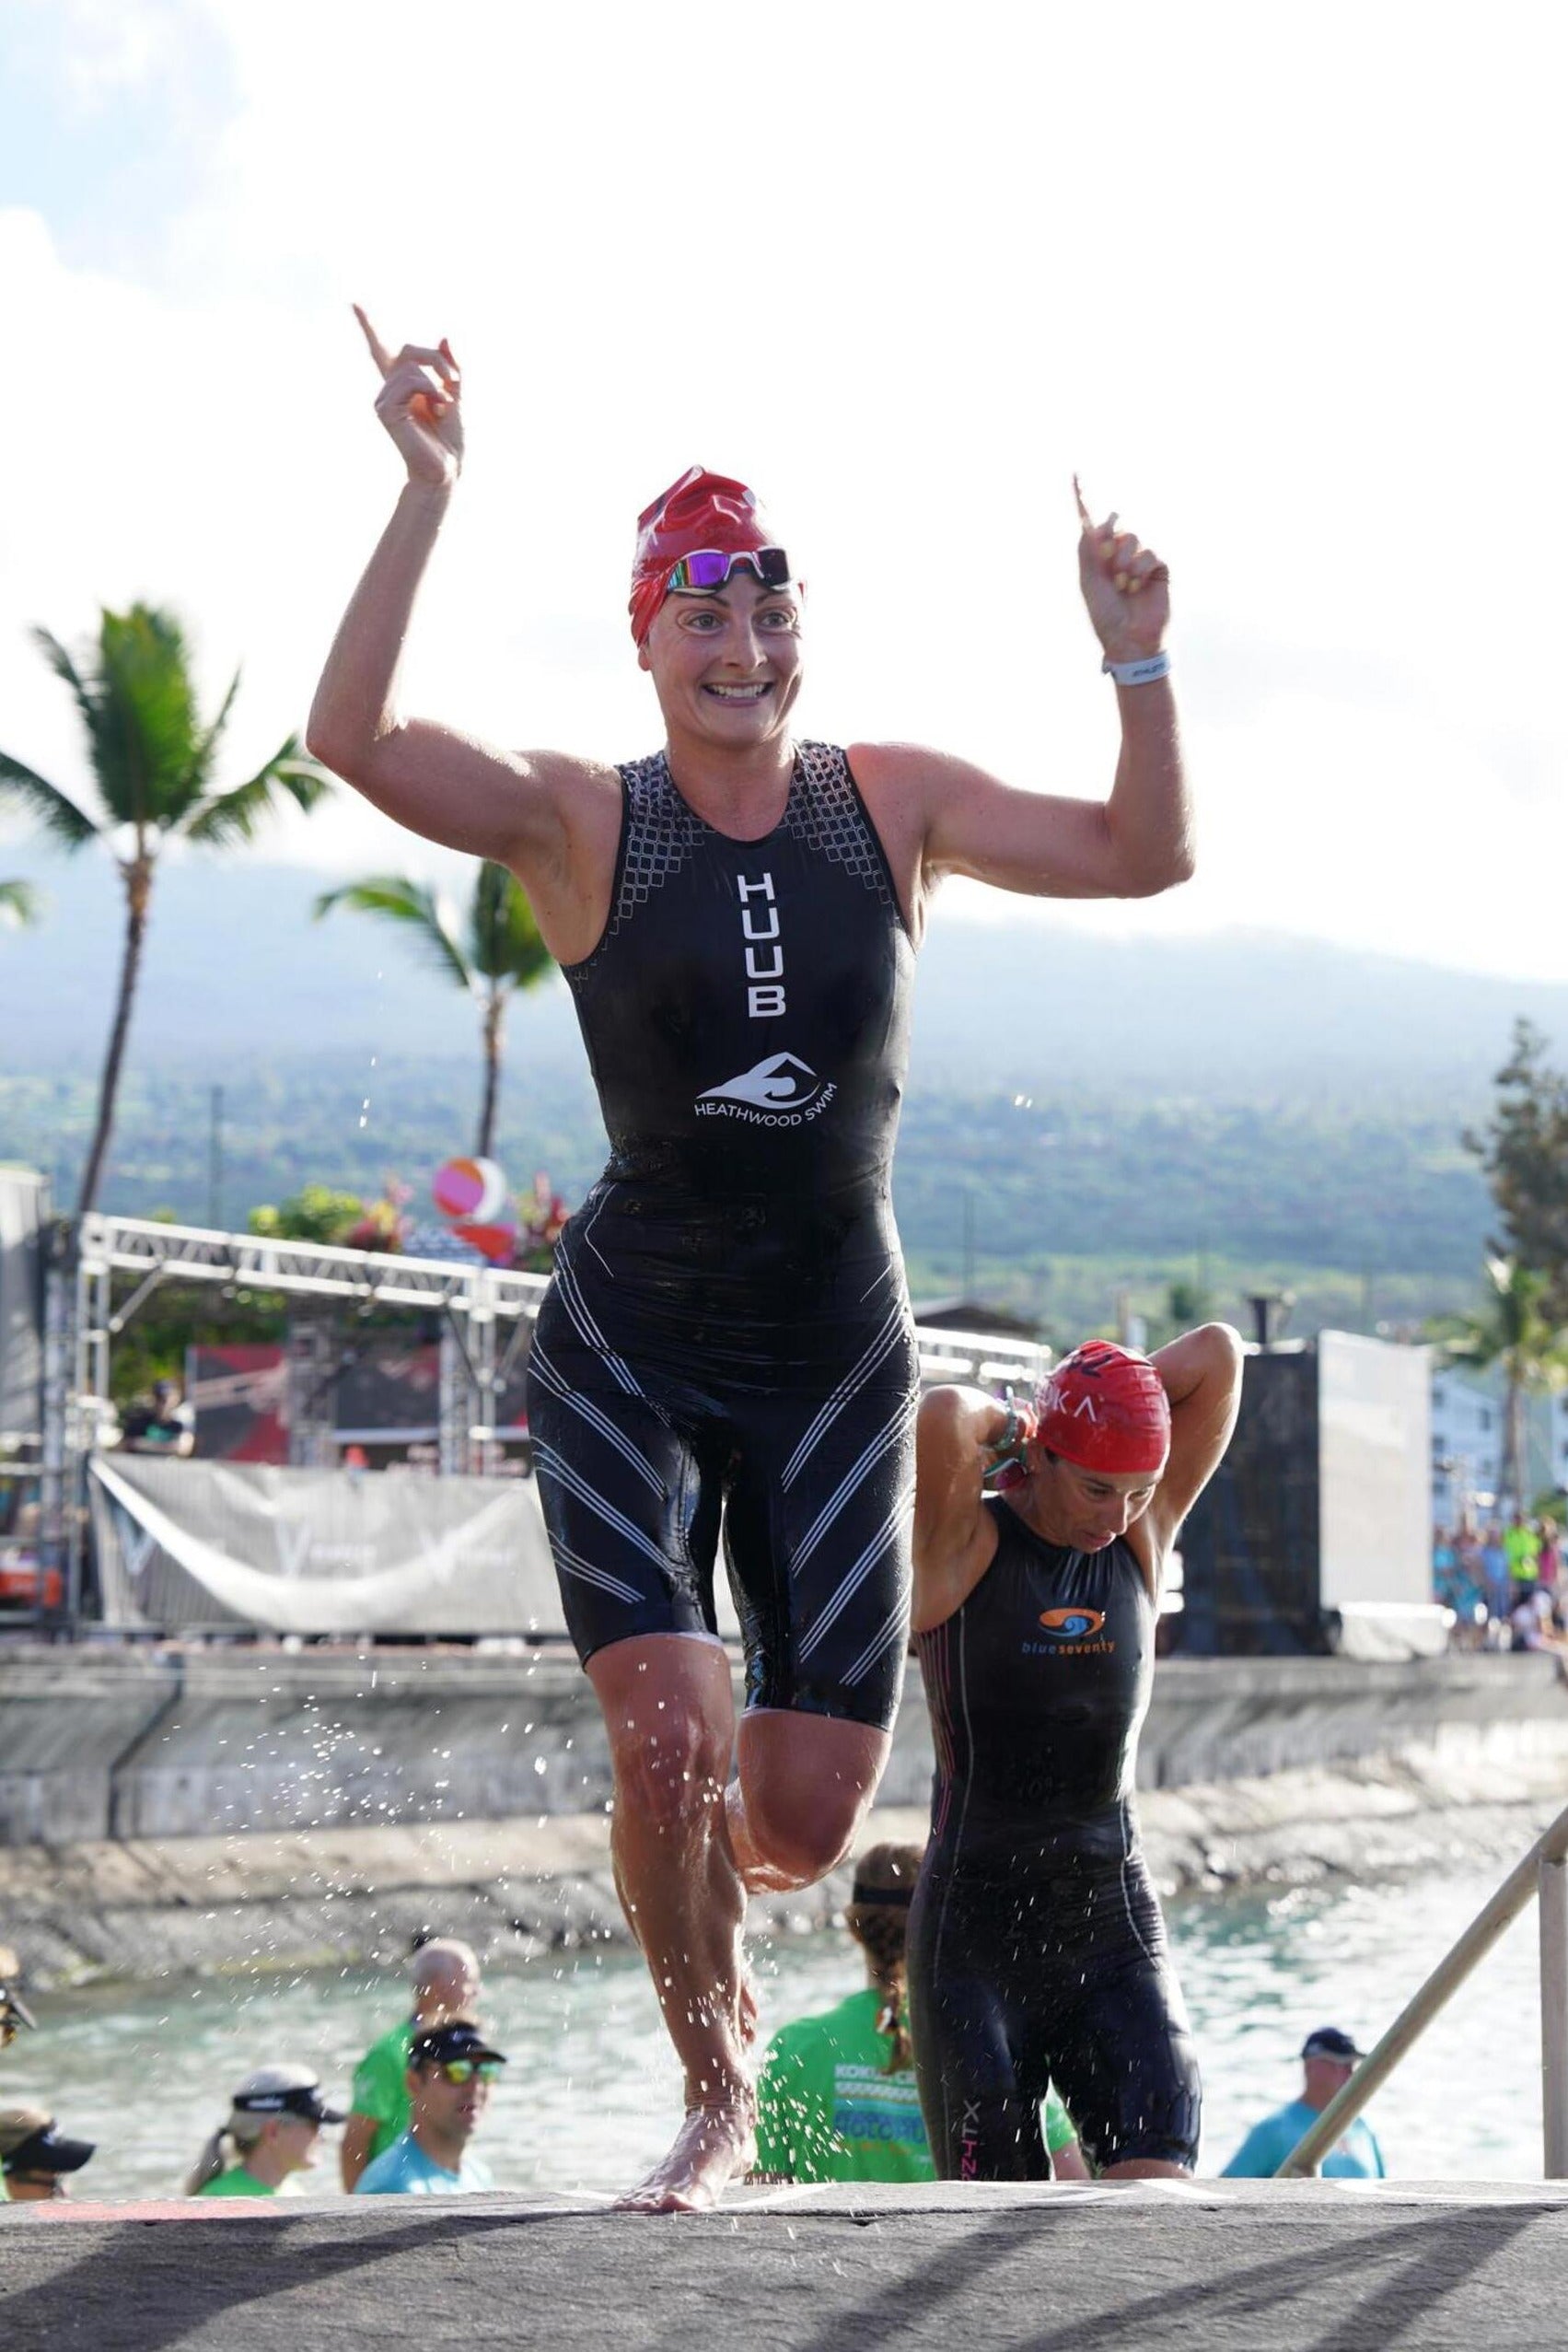 Pro athlete emerging from the water participating in an Ironman event 